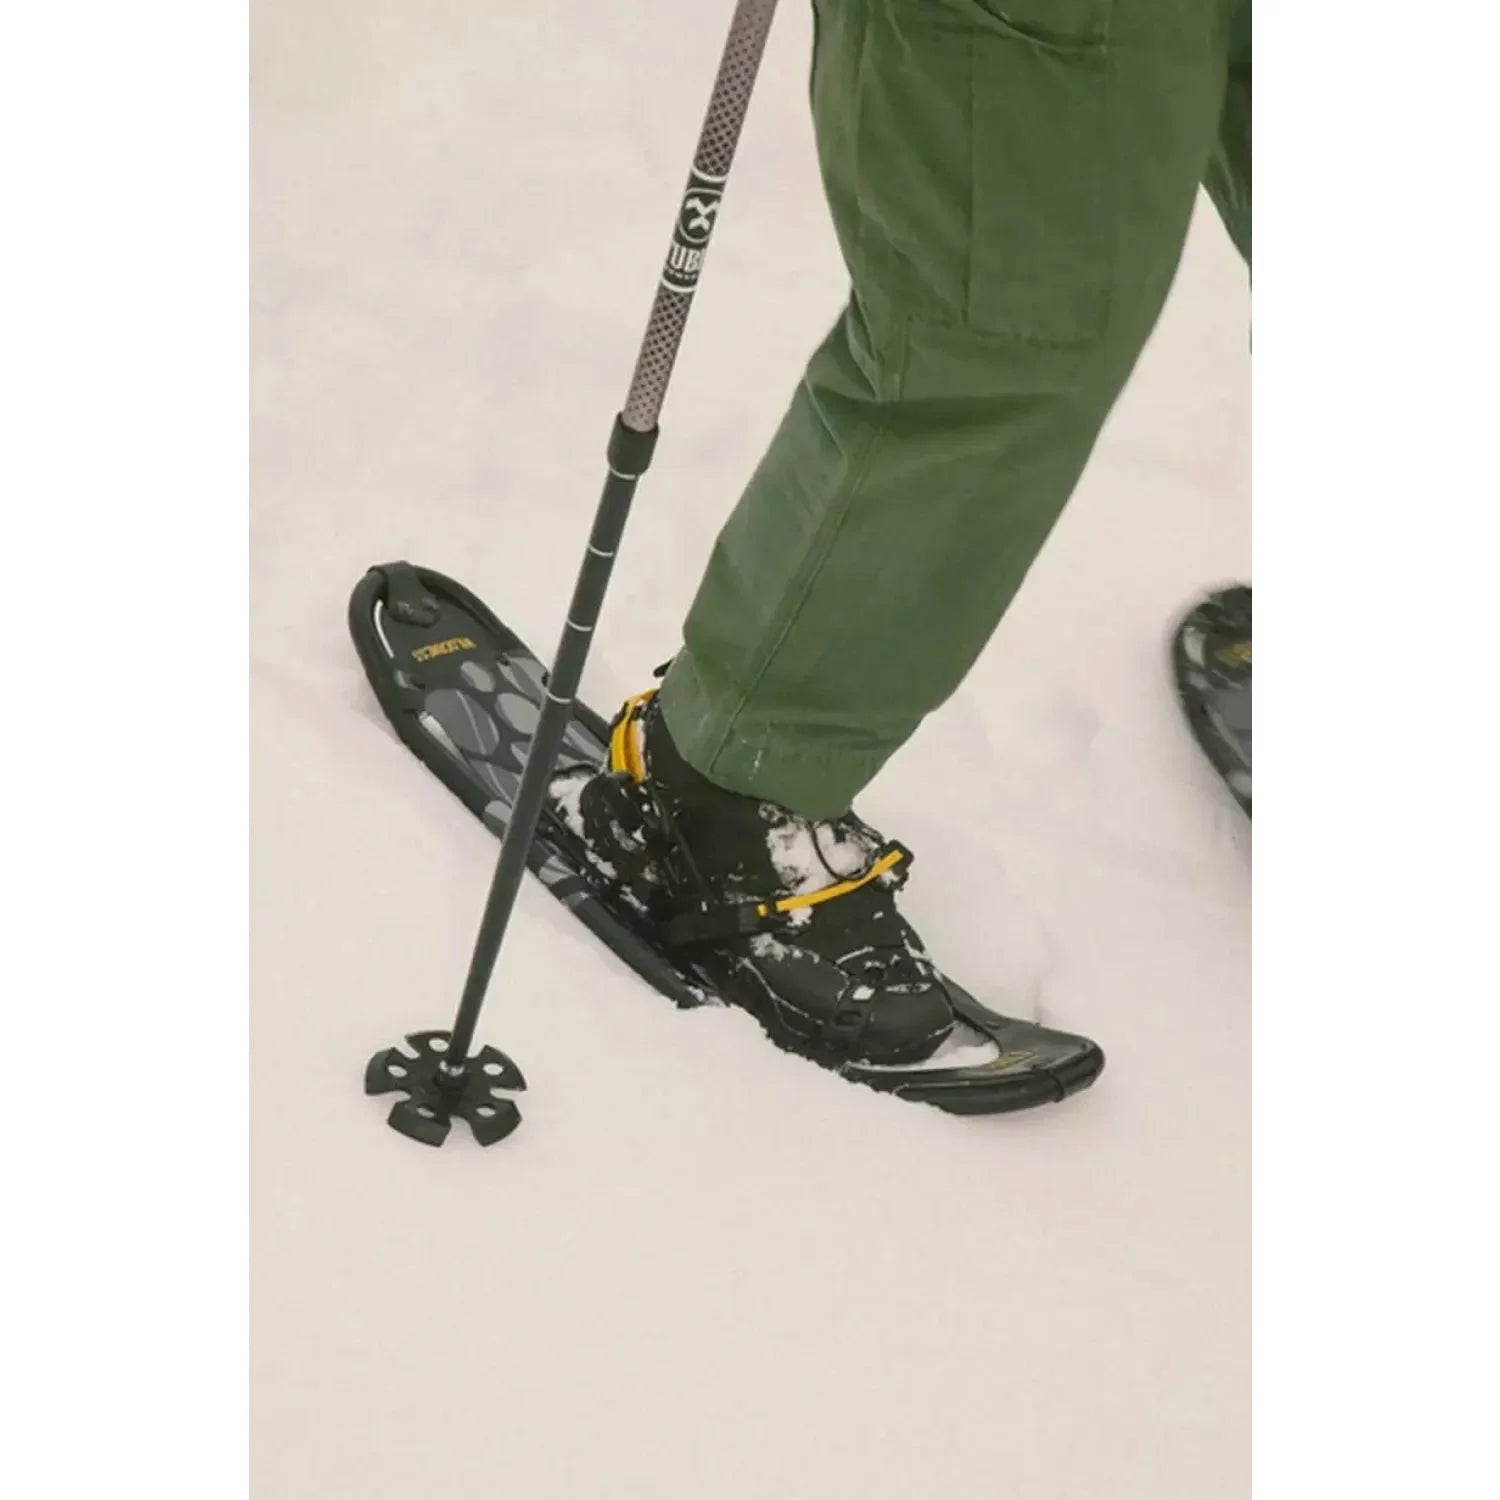 Tubbs Men's Wilderness Snowshoe in Black, lifestyle view of man in deep snow with snowshoes on.